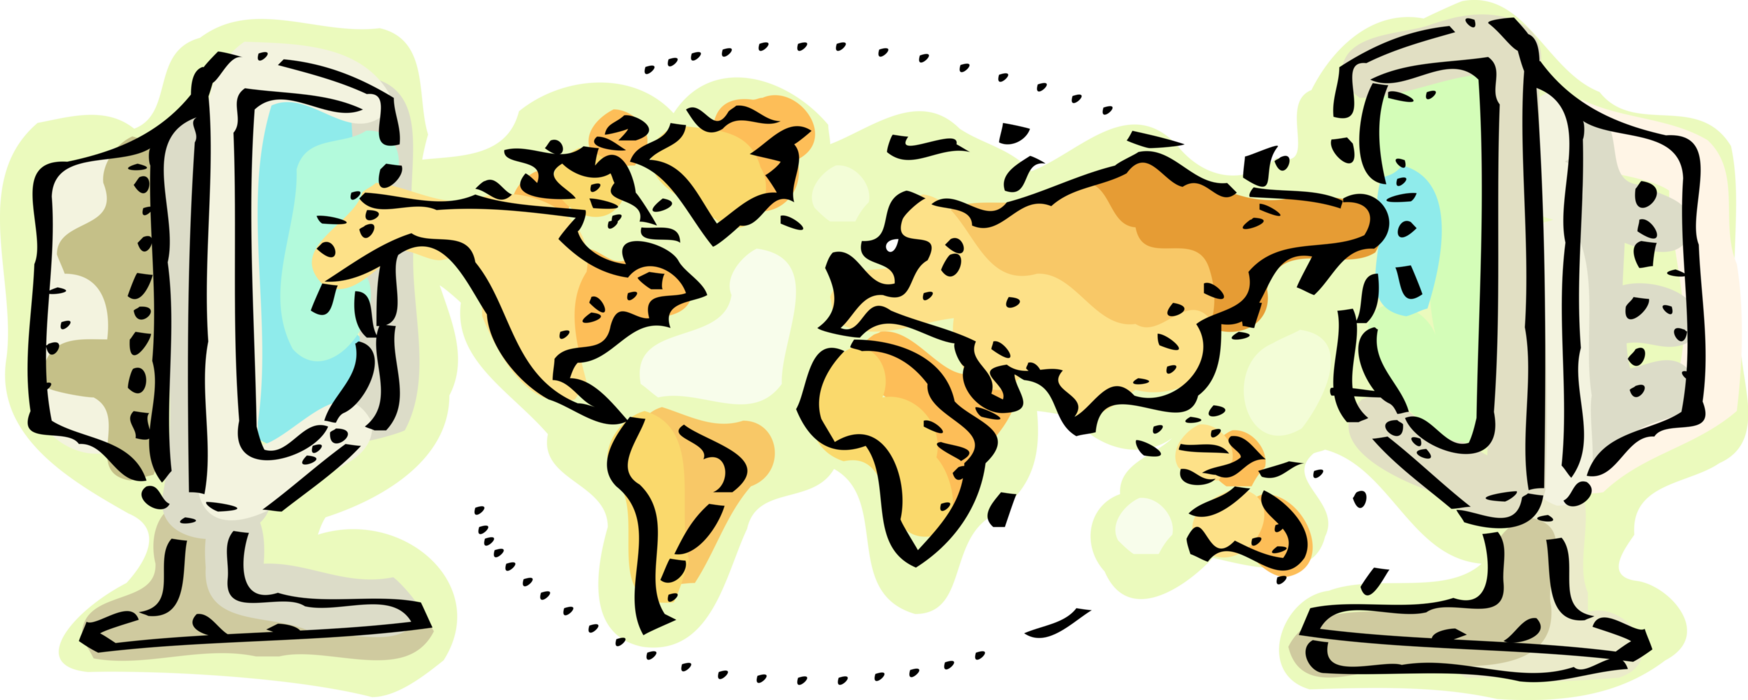 Vector Illustration of International Global Telecommunications Networked Computers with Planet Earth World